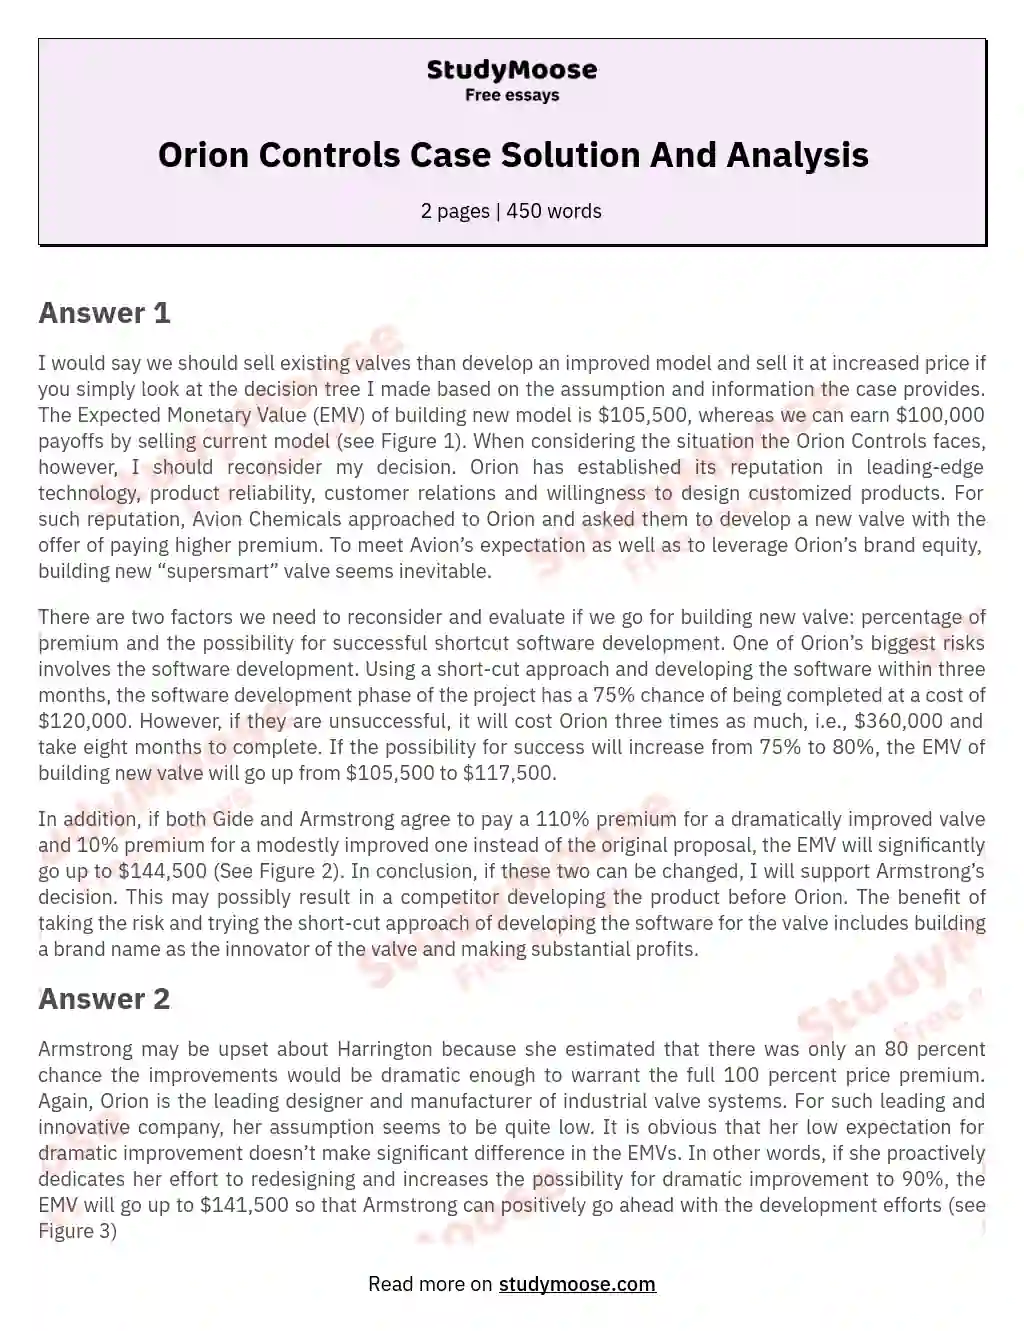 Orion Controls Case Solution And Analysis